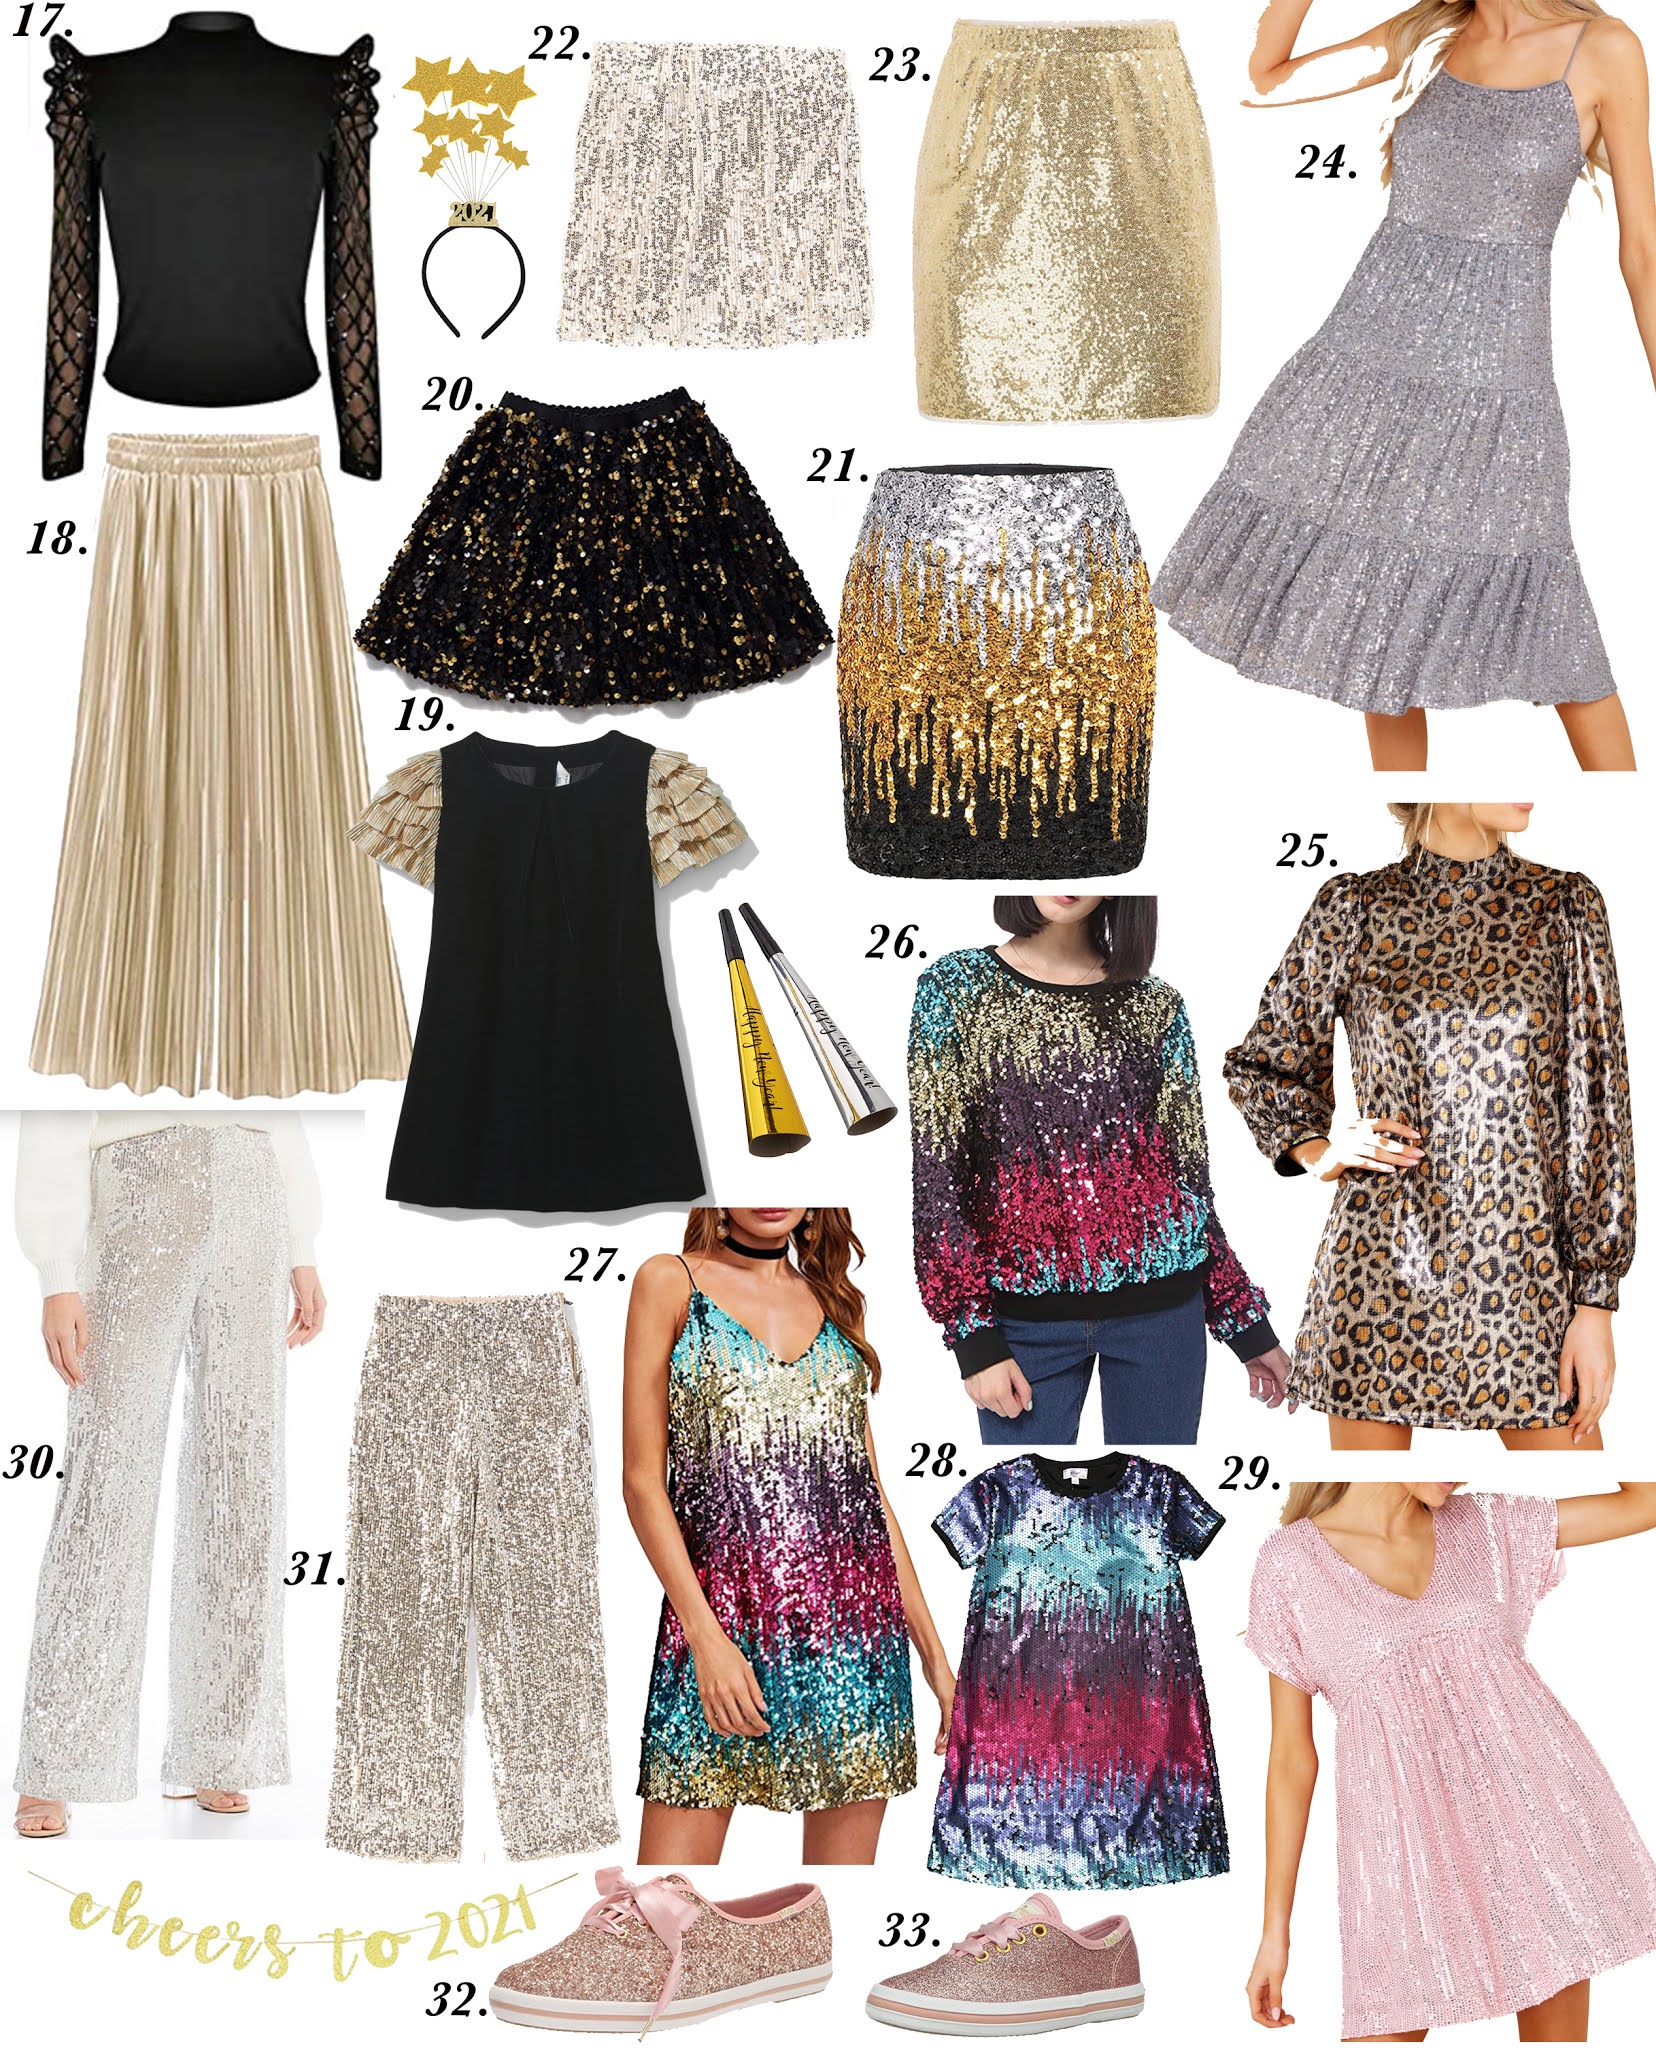 25 Best New Years Eve Outfit Ideas Sure to Dazzle